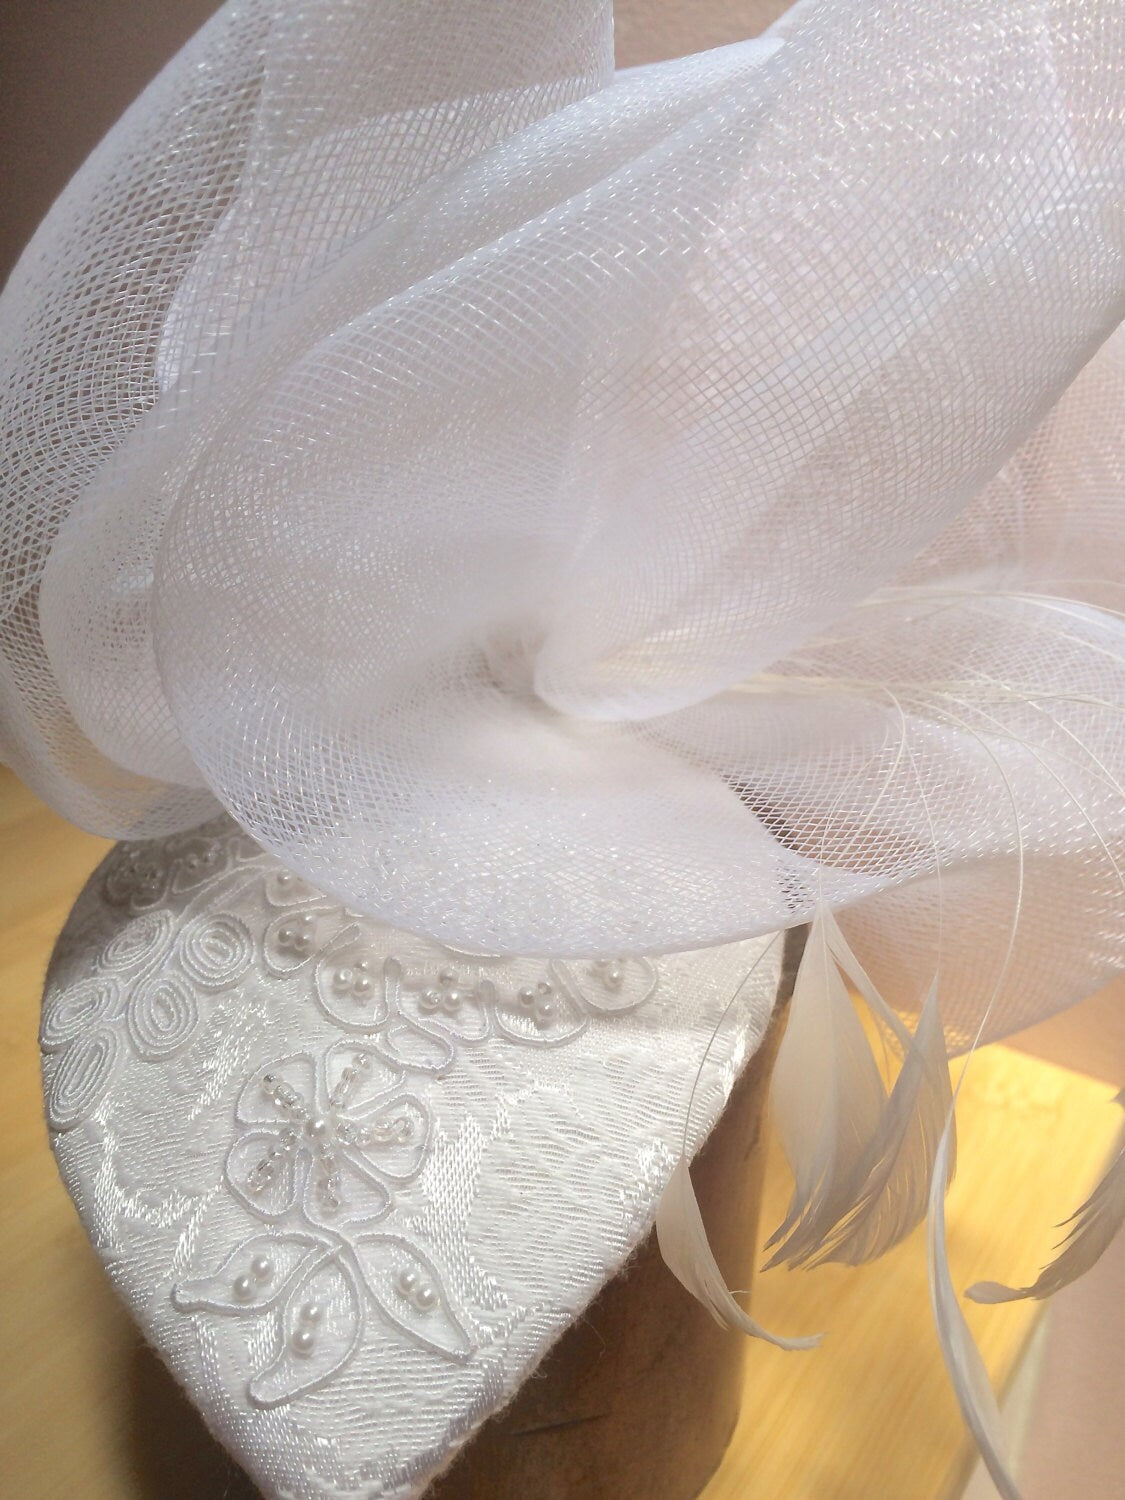 Pure White Wedding Fascinator with Feathers, Traditional wedding headpiece, White Wedding hat with White Crinoline. Beaded wedding headpiece